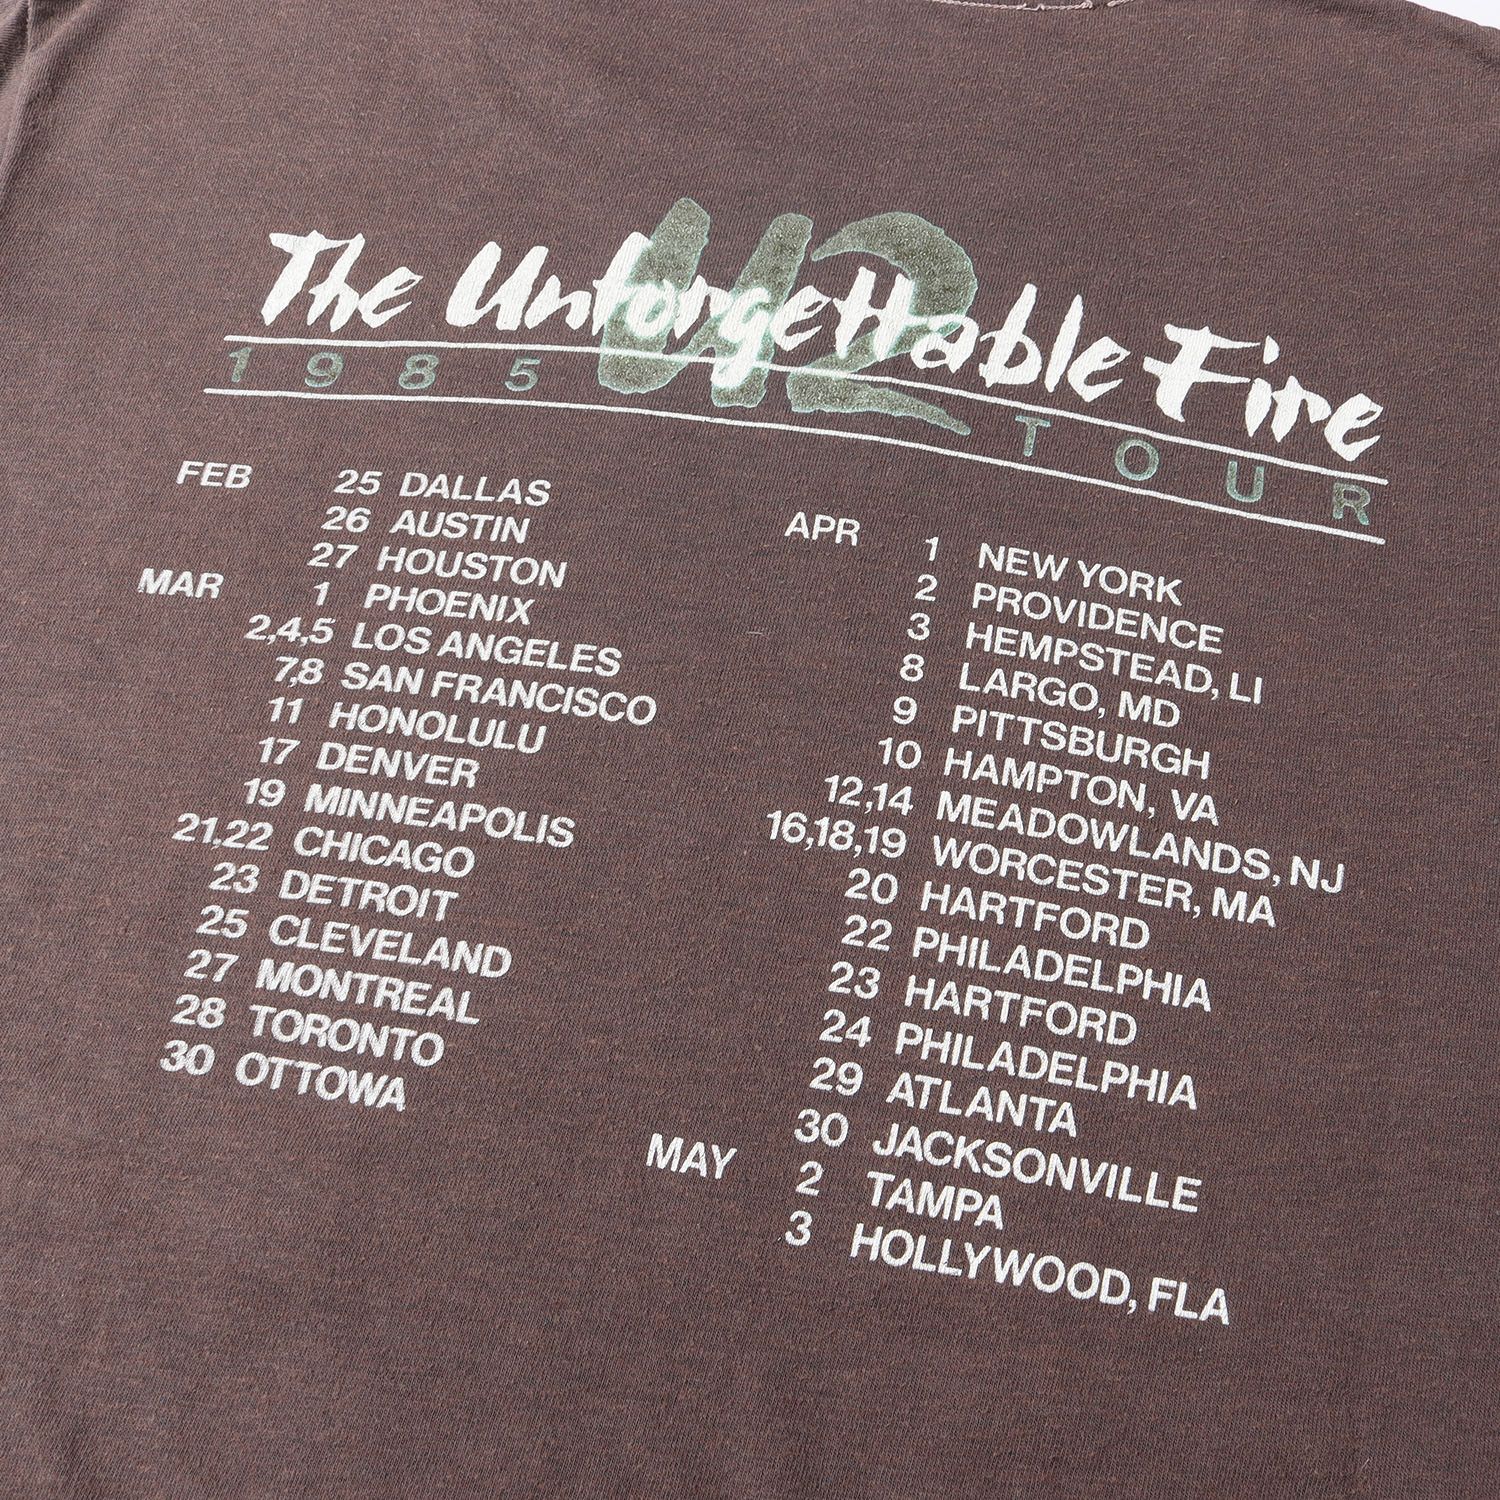 Vintage Rock Item ヴィンテージロックアイテム 80s U2 The Unforgettable Fire 1985 TOUR クルーネック Tシャツ CHED by Anvilボディ / USA製 チャコール 詳細参照(L位) トップス カットソー 半袖 バンド  【メンズ】